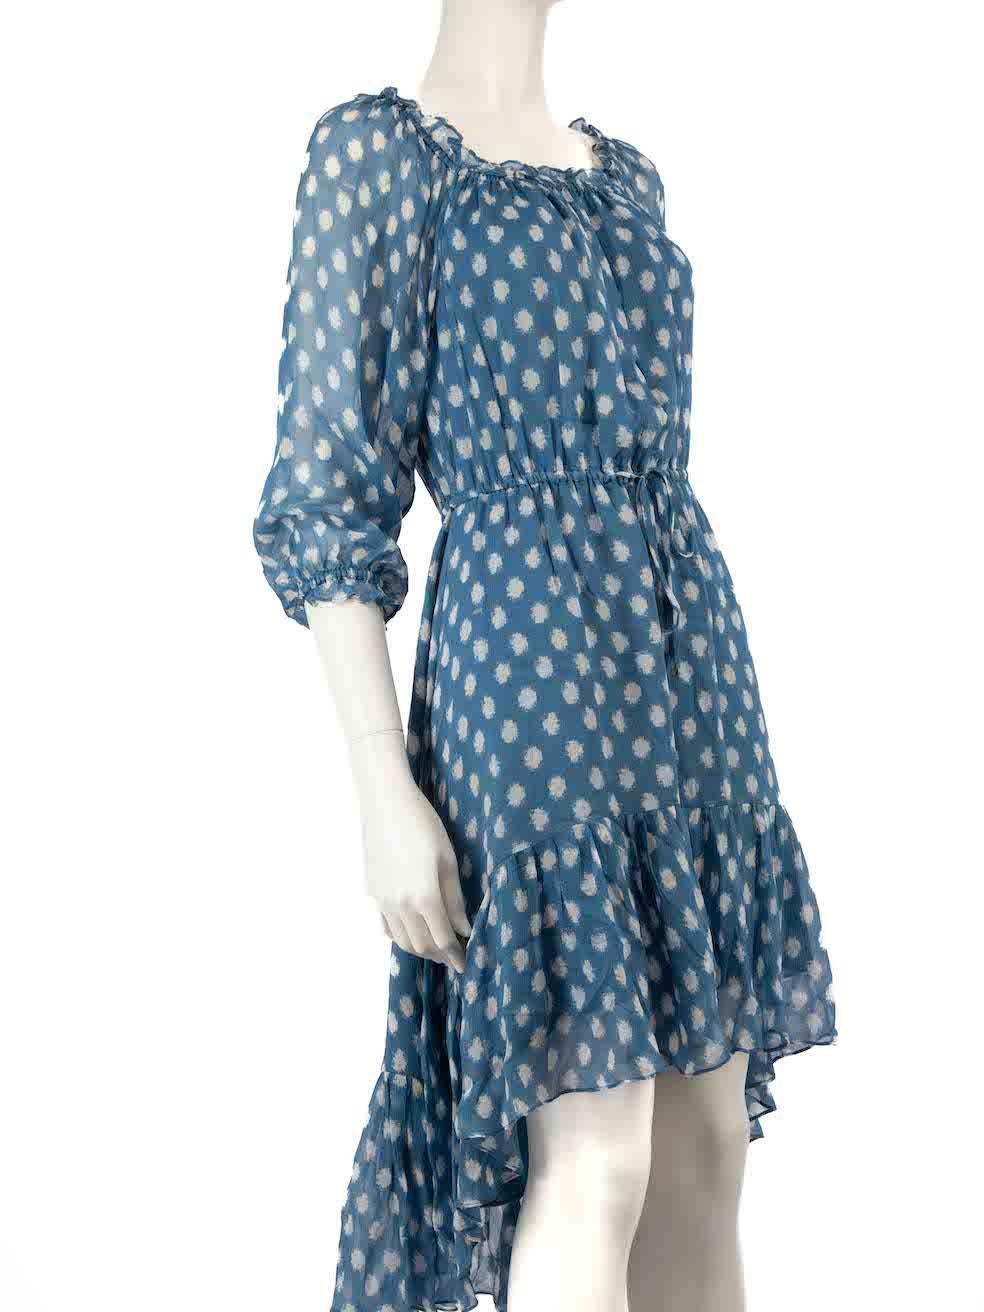 CONDITION is Very good. Minimal wear to the dress is evident. Minimal wear to the front below the waistline is seen with a pull to the weave on this used Diane Von Furstenberg designer resale item.
 
 
 
 Details
 
 
 Blue x white
 
 Spot print
 
